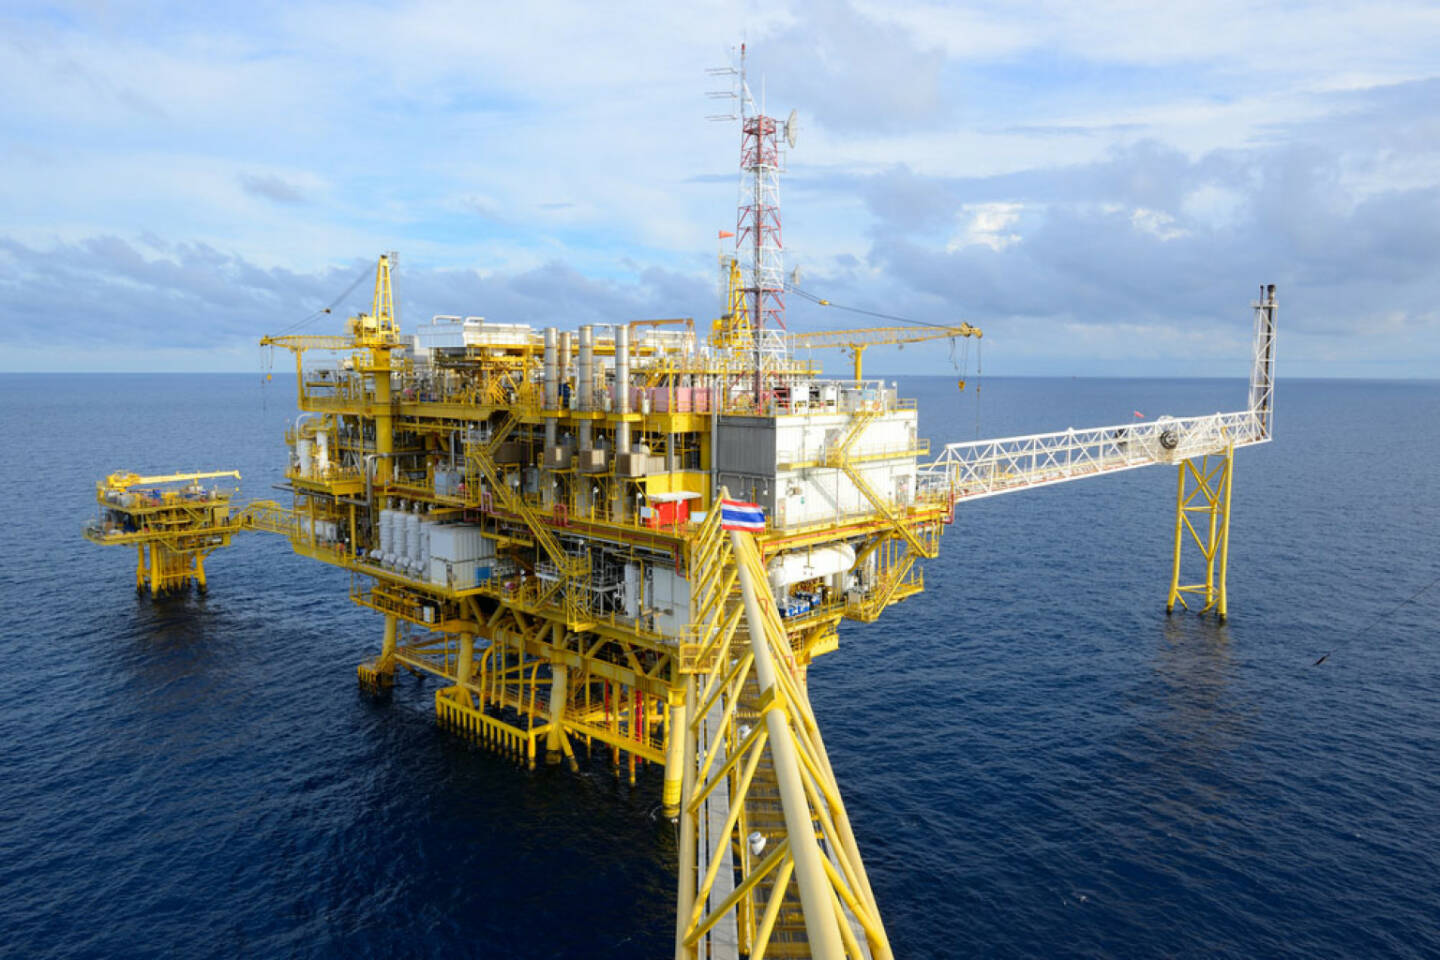 Bohrinsel, Meer, Industrie, Rohstoffe, Plattform, Öl, Gas, Thailand, http://www.shutterstock.com/de/pic-110796884/stock-photo-the-offshore-oil-rig-in-the-gulf-of-thailand.html